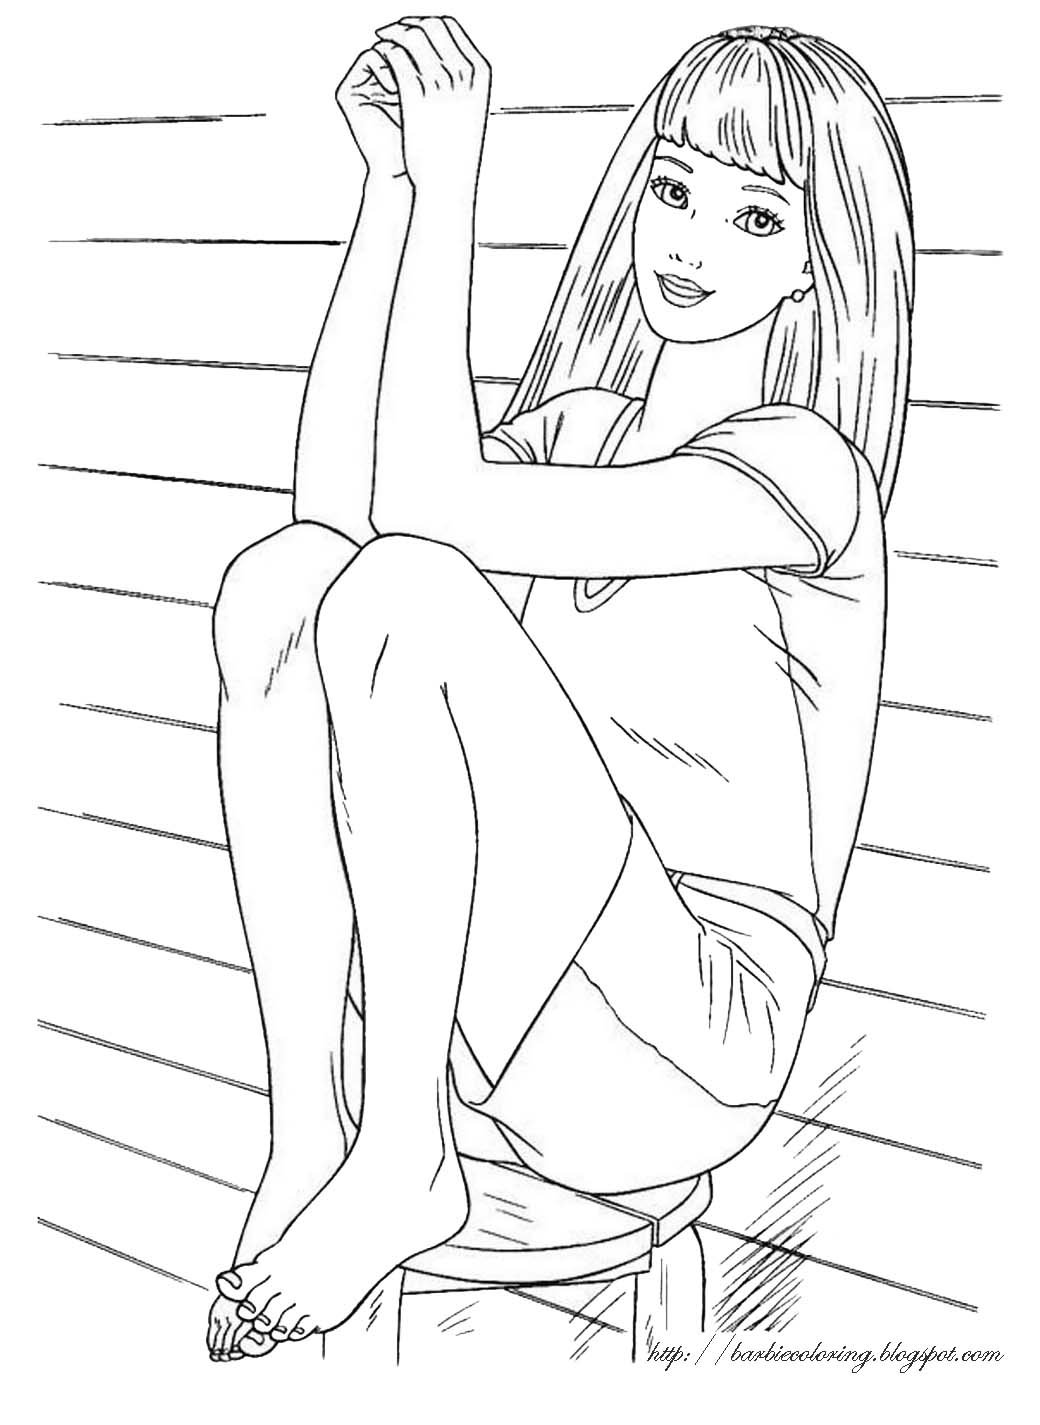 barbie doll coloring pages disney cartoon barbie doll princess coloring pages pages doll barbie coloring 